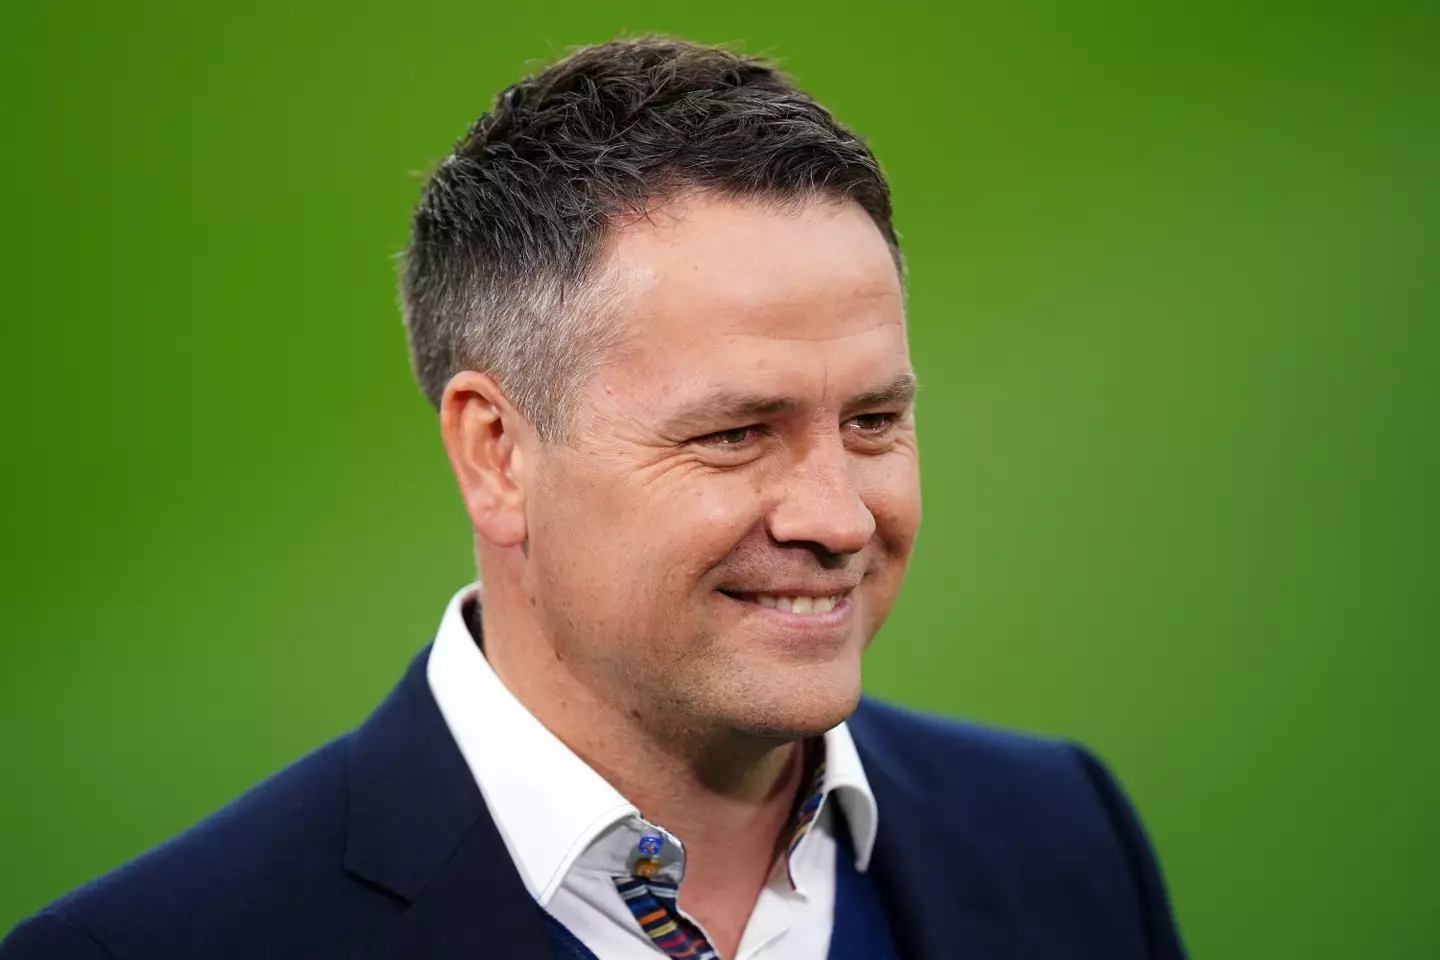 Michael Owen is said to be 'horrified' at the rumours.